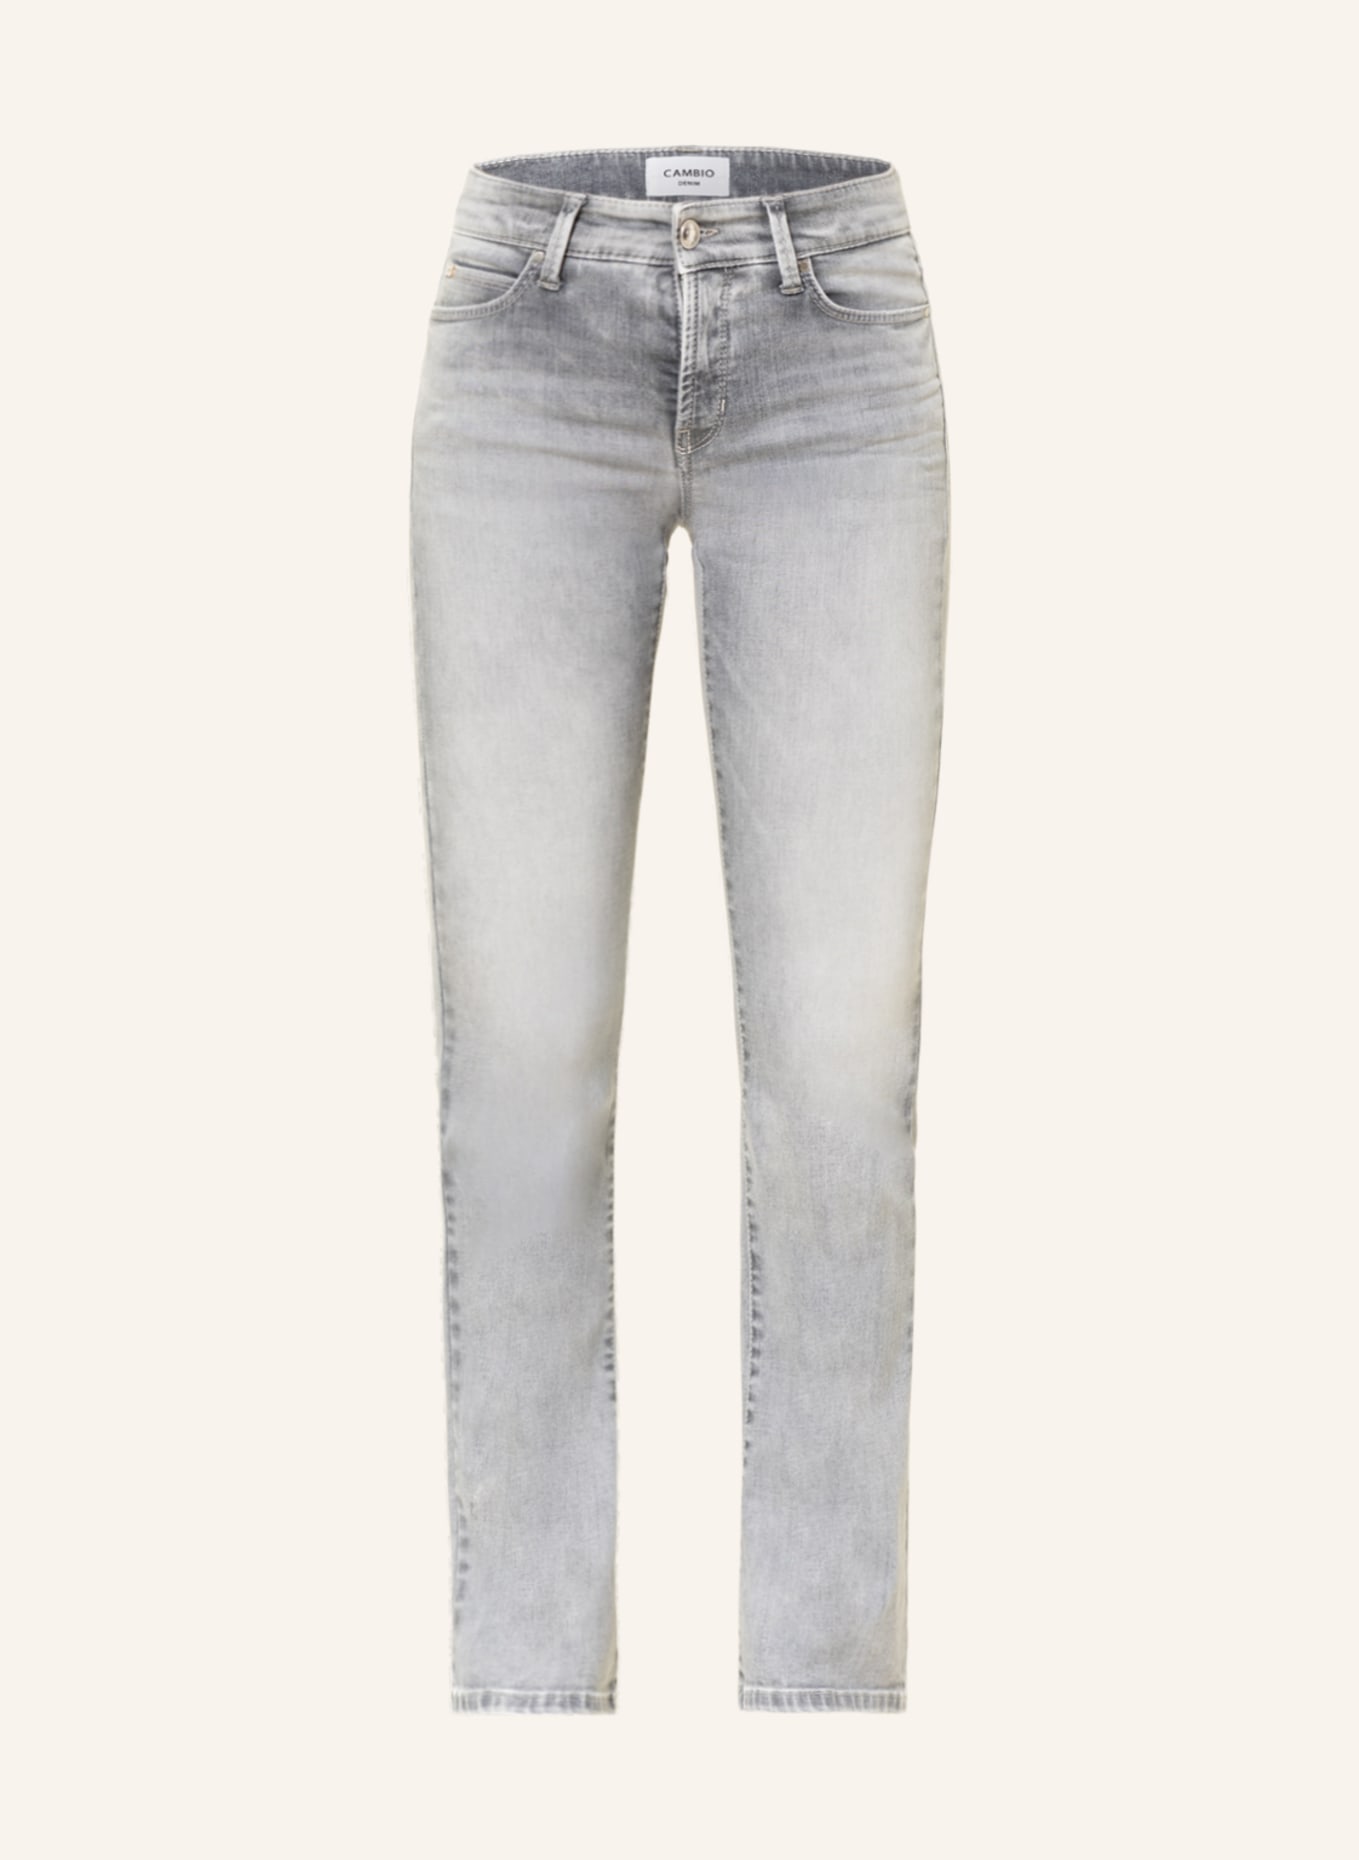 CAMBIO Flared Jeans PARIS, Farbe: 5282 contrast bleached (Bild 1)